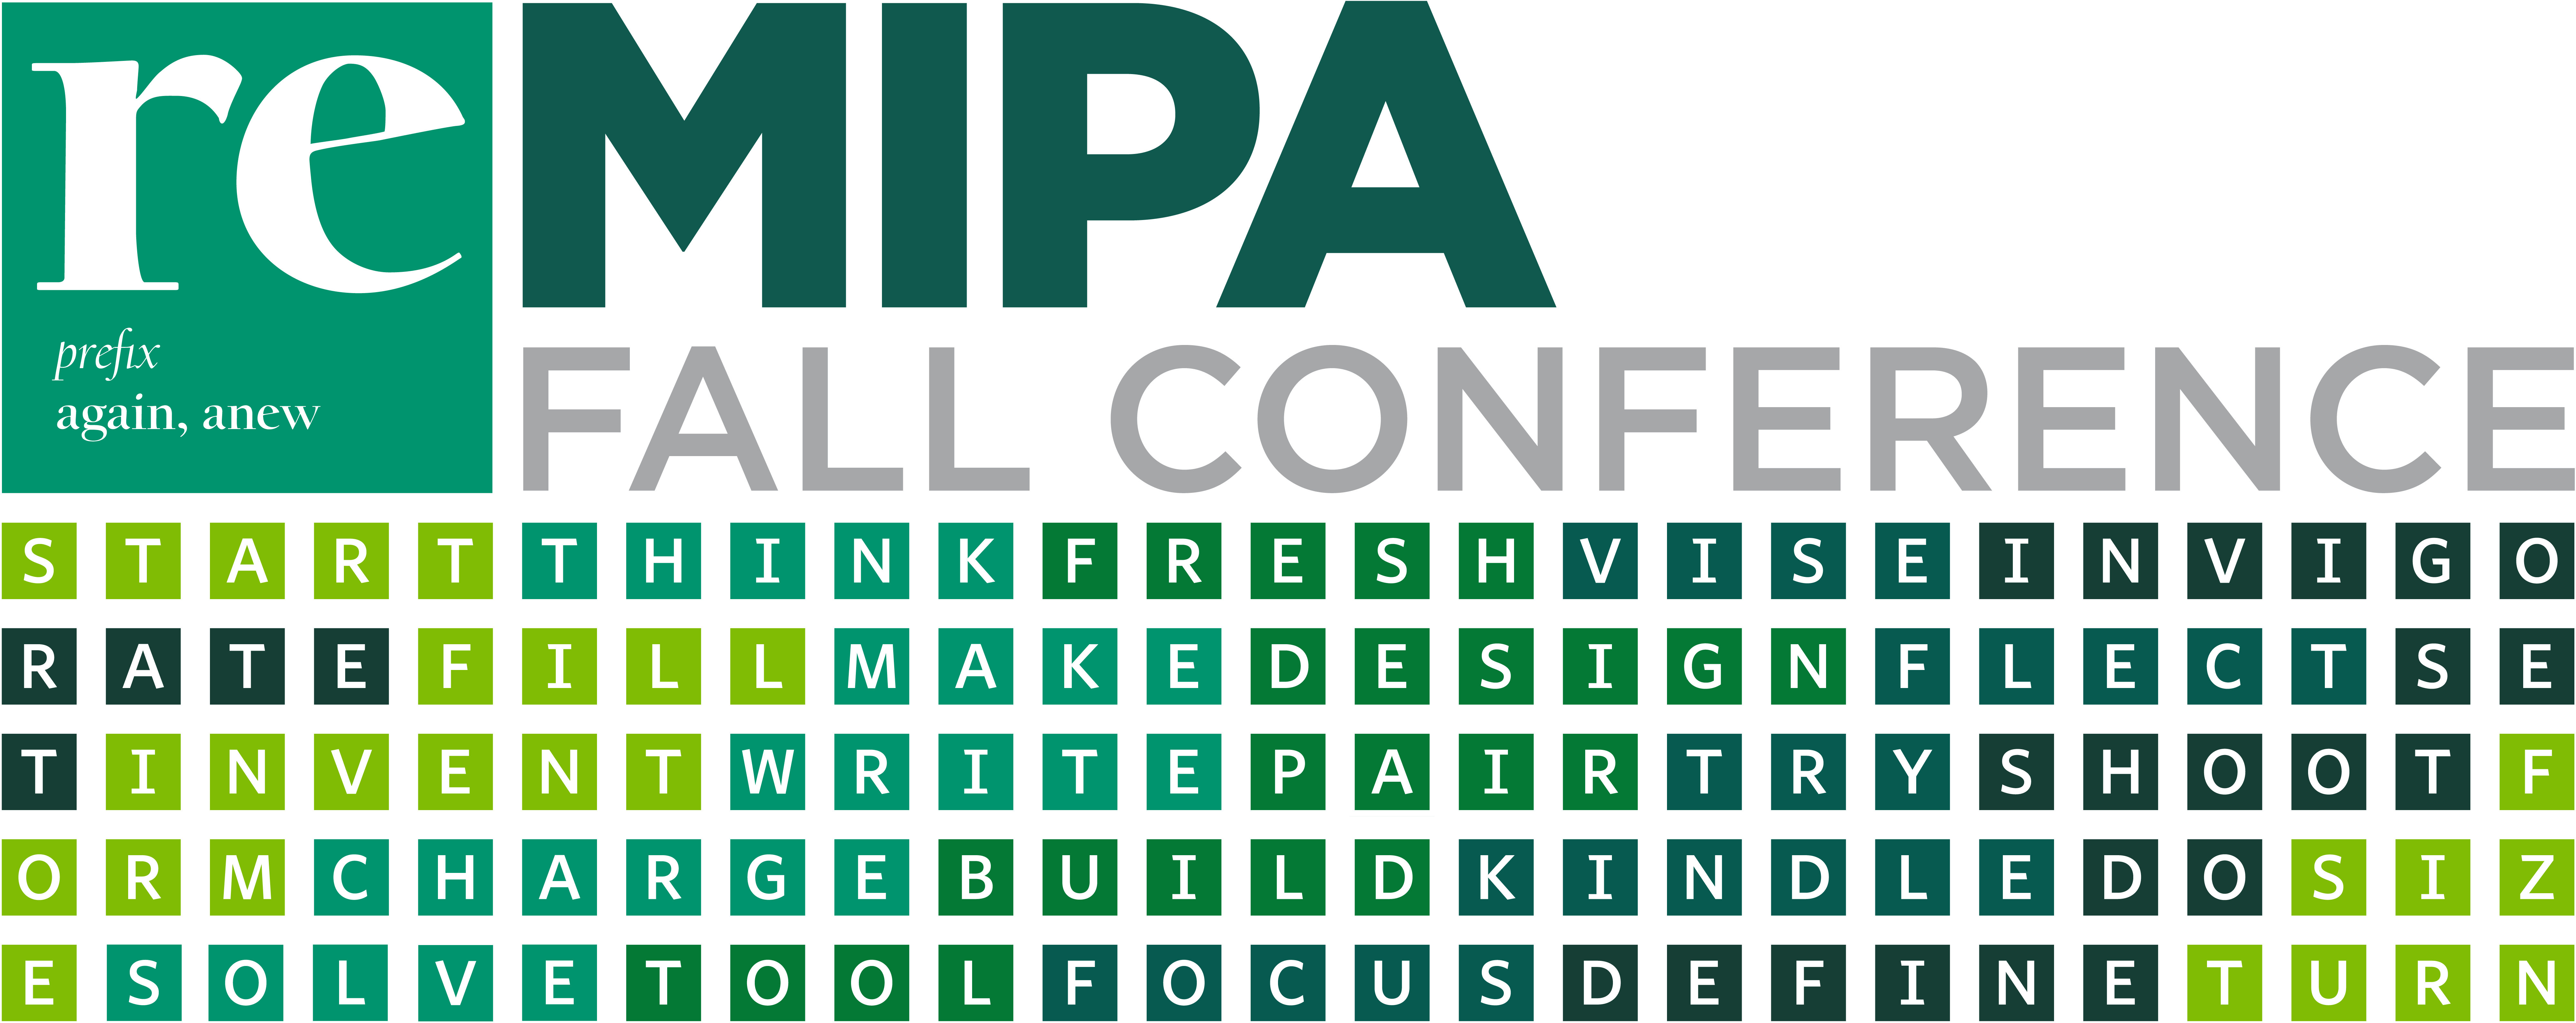 MIPA Fall Conference "Re-: prefix, again, anew" with a variety of words that start with "re"